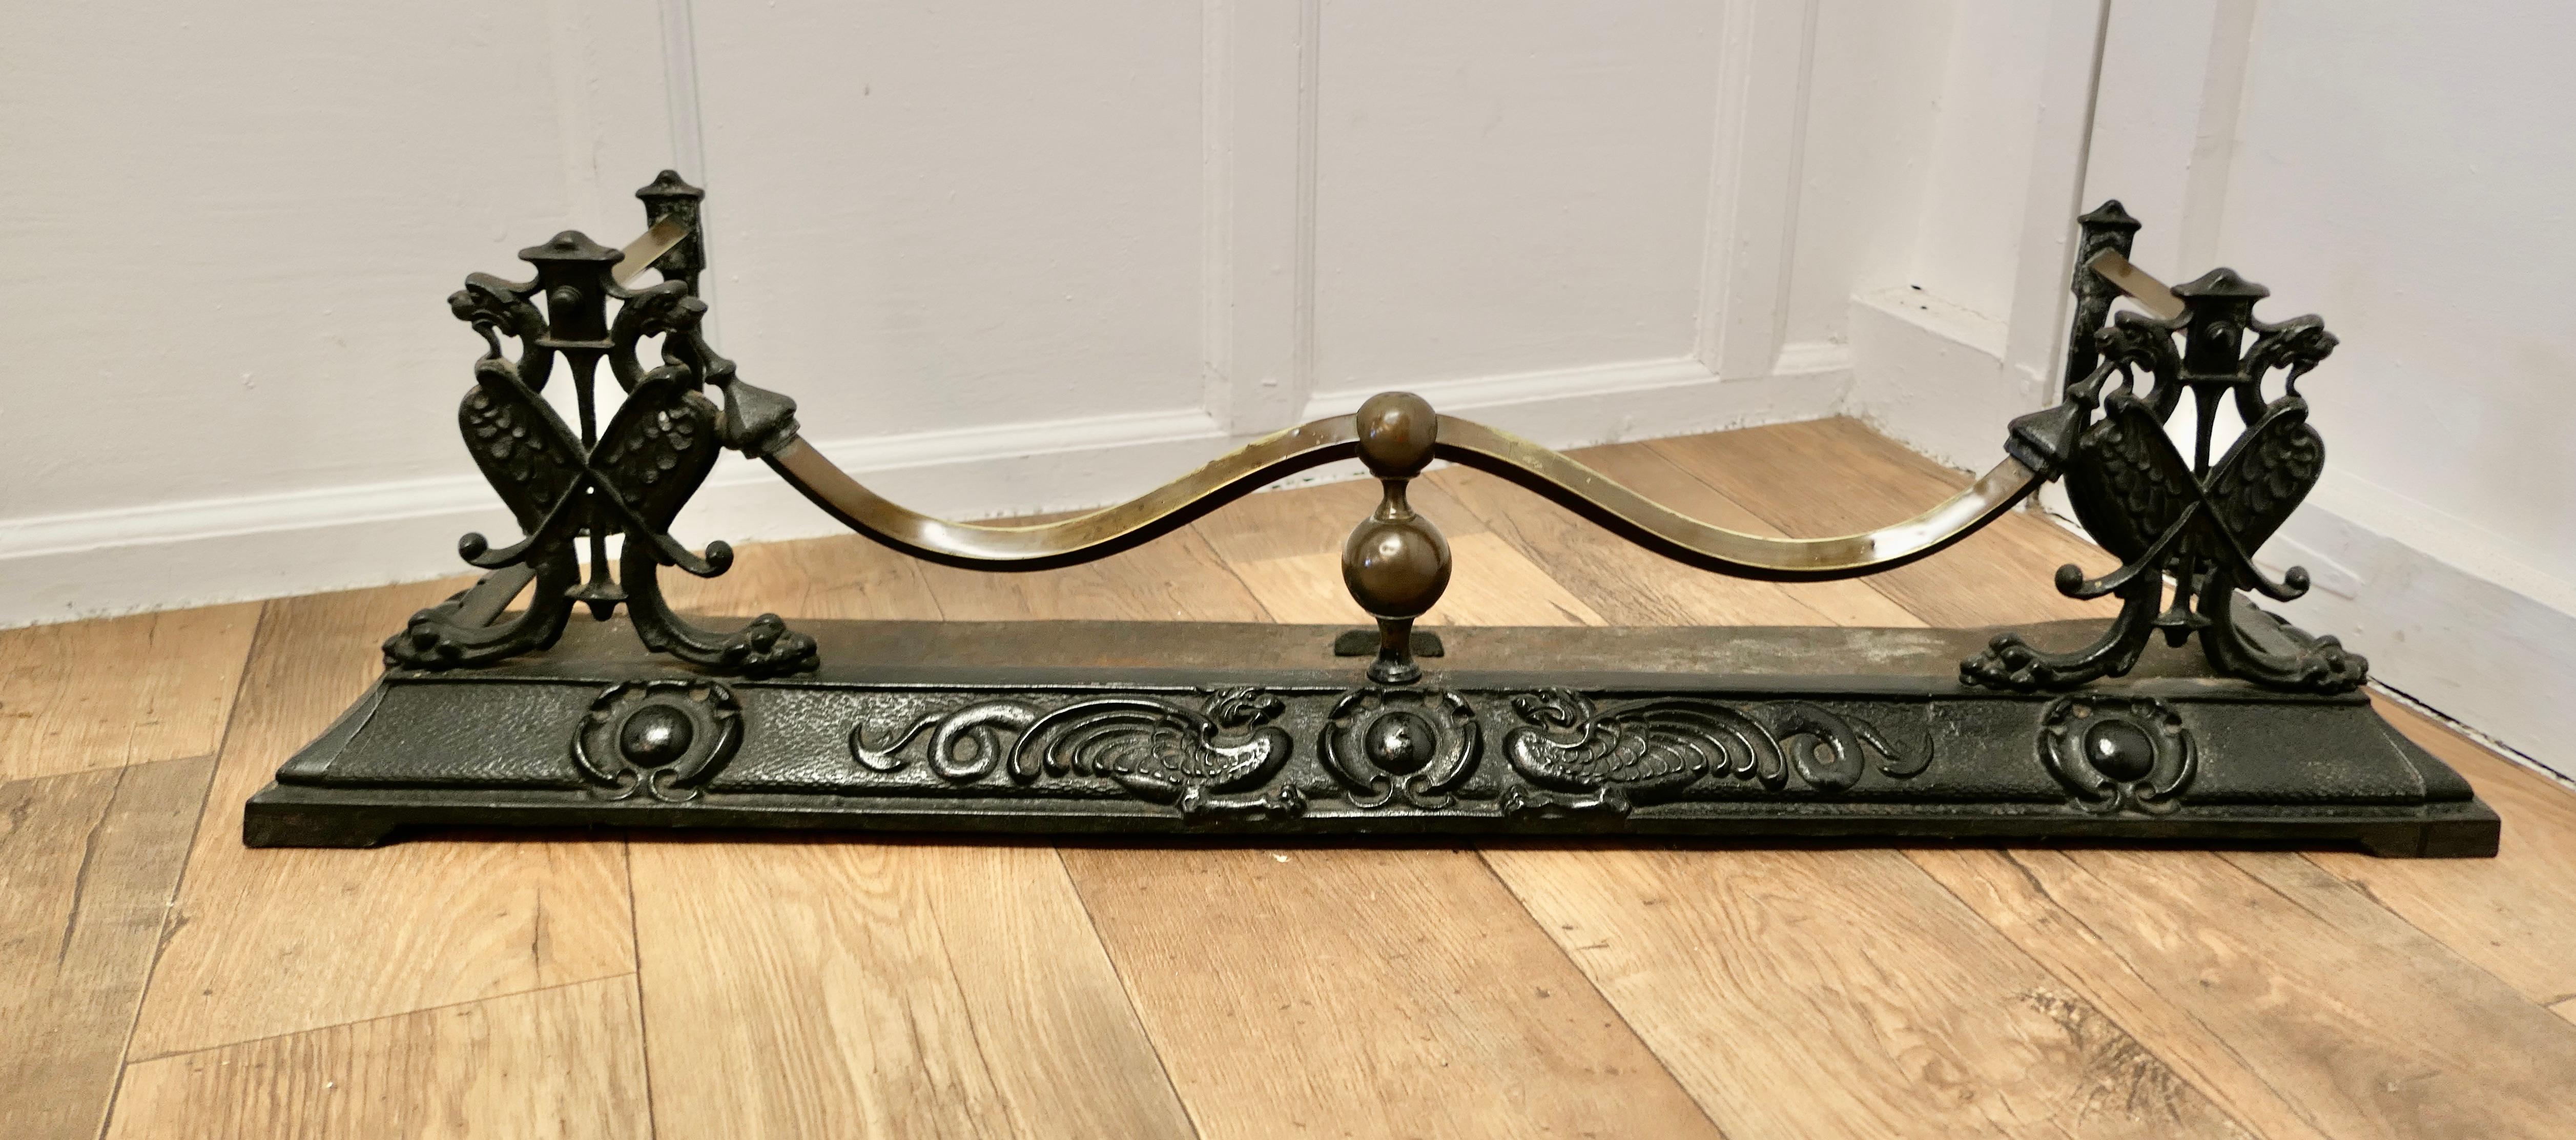 Victorian Art Nouveau Cast Iron and Brass Fender

This is a Beautifully Designed Victorian Fender it has superb Art Nouveau decoration showing Dragons and Serpents
The Fender is in good sound condition it is 12” high, and 45” long and 12”